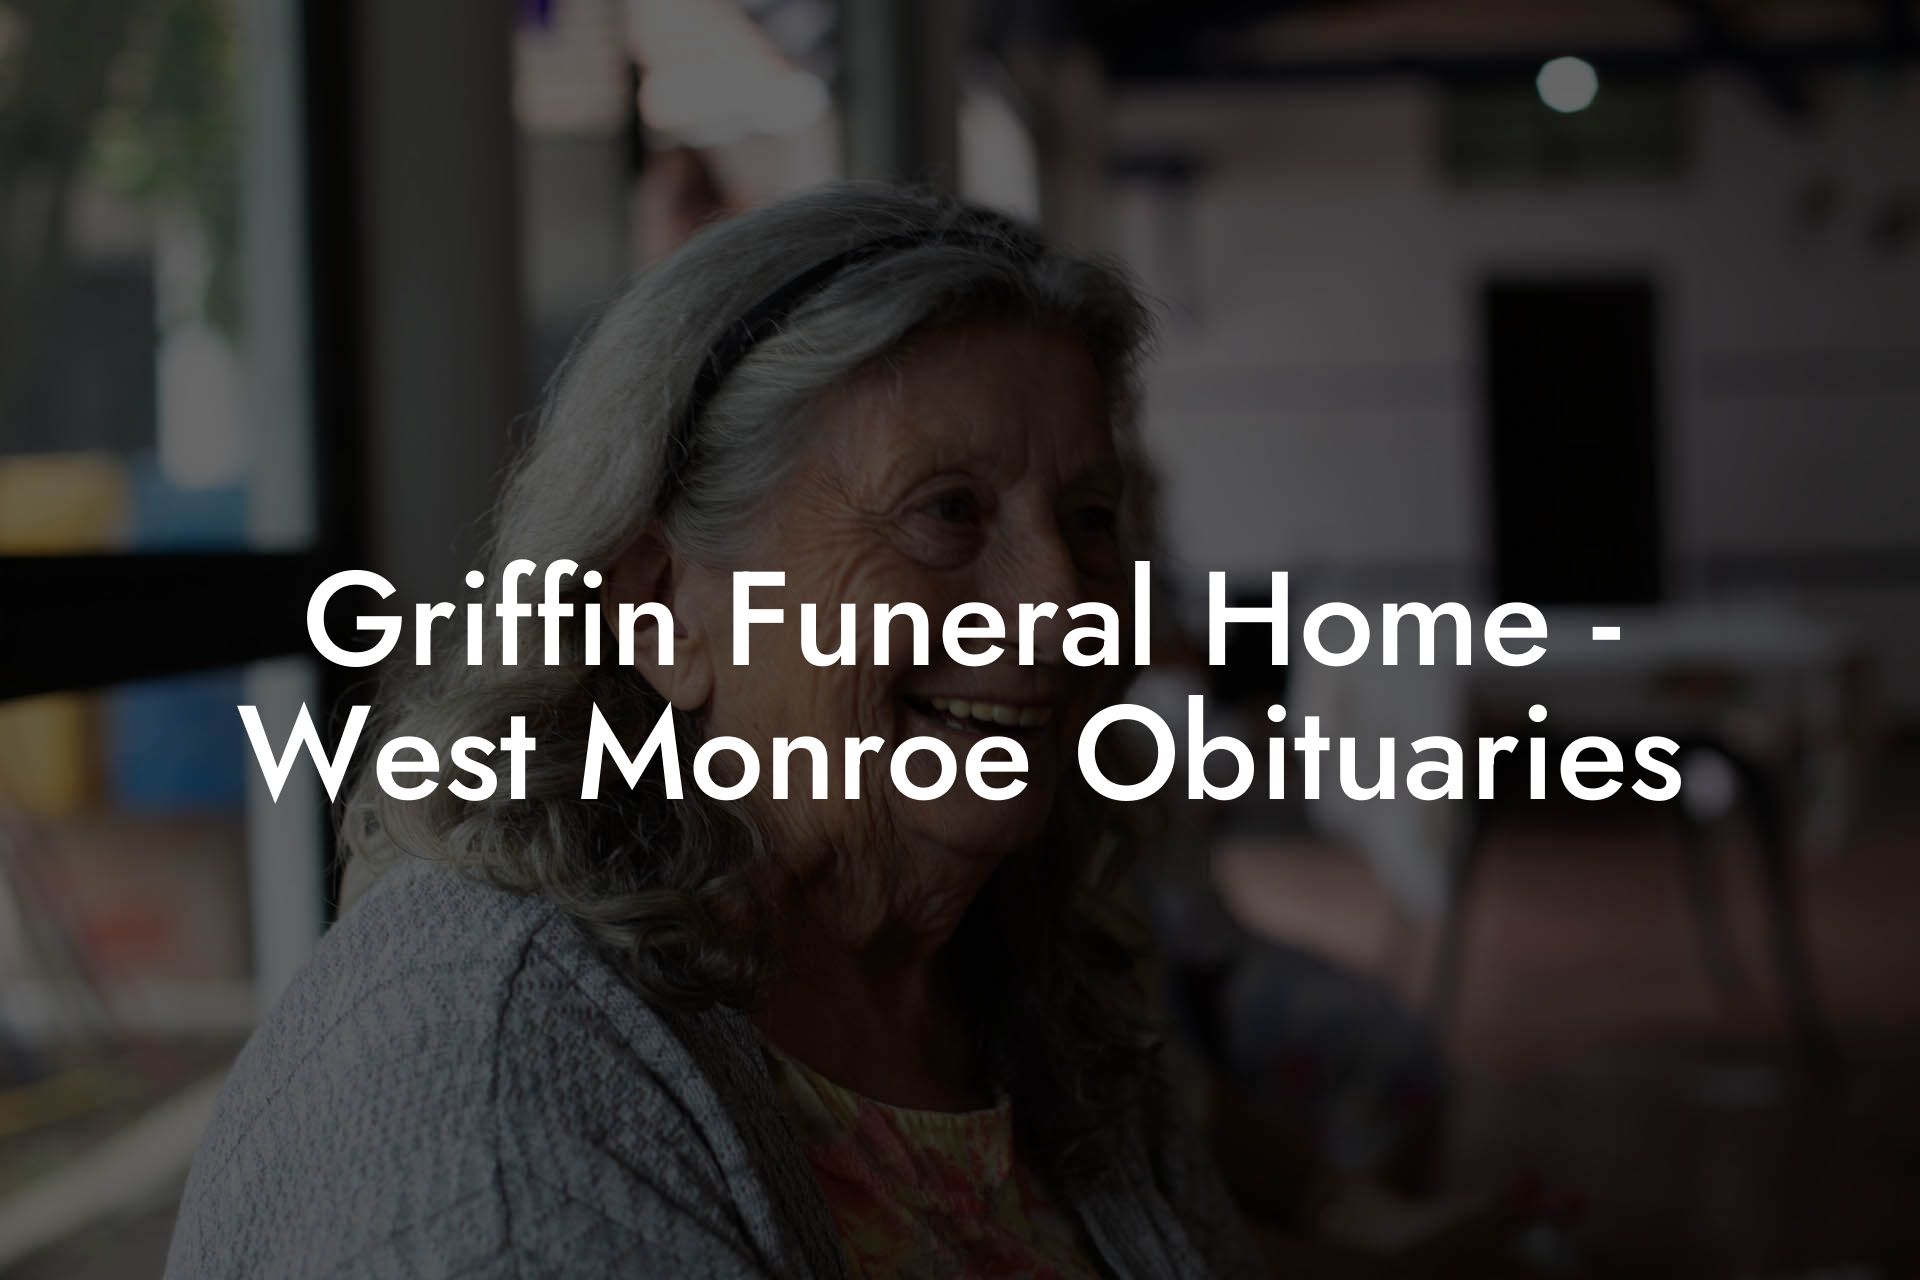 Griffin Funeral Home - West Monroe Obituaries